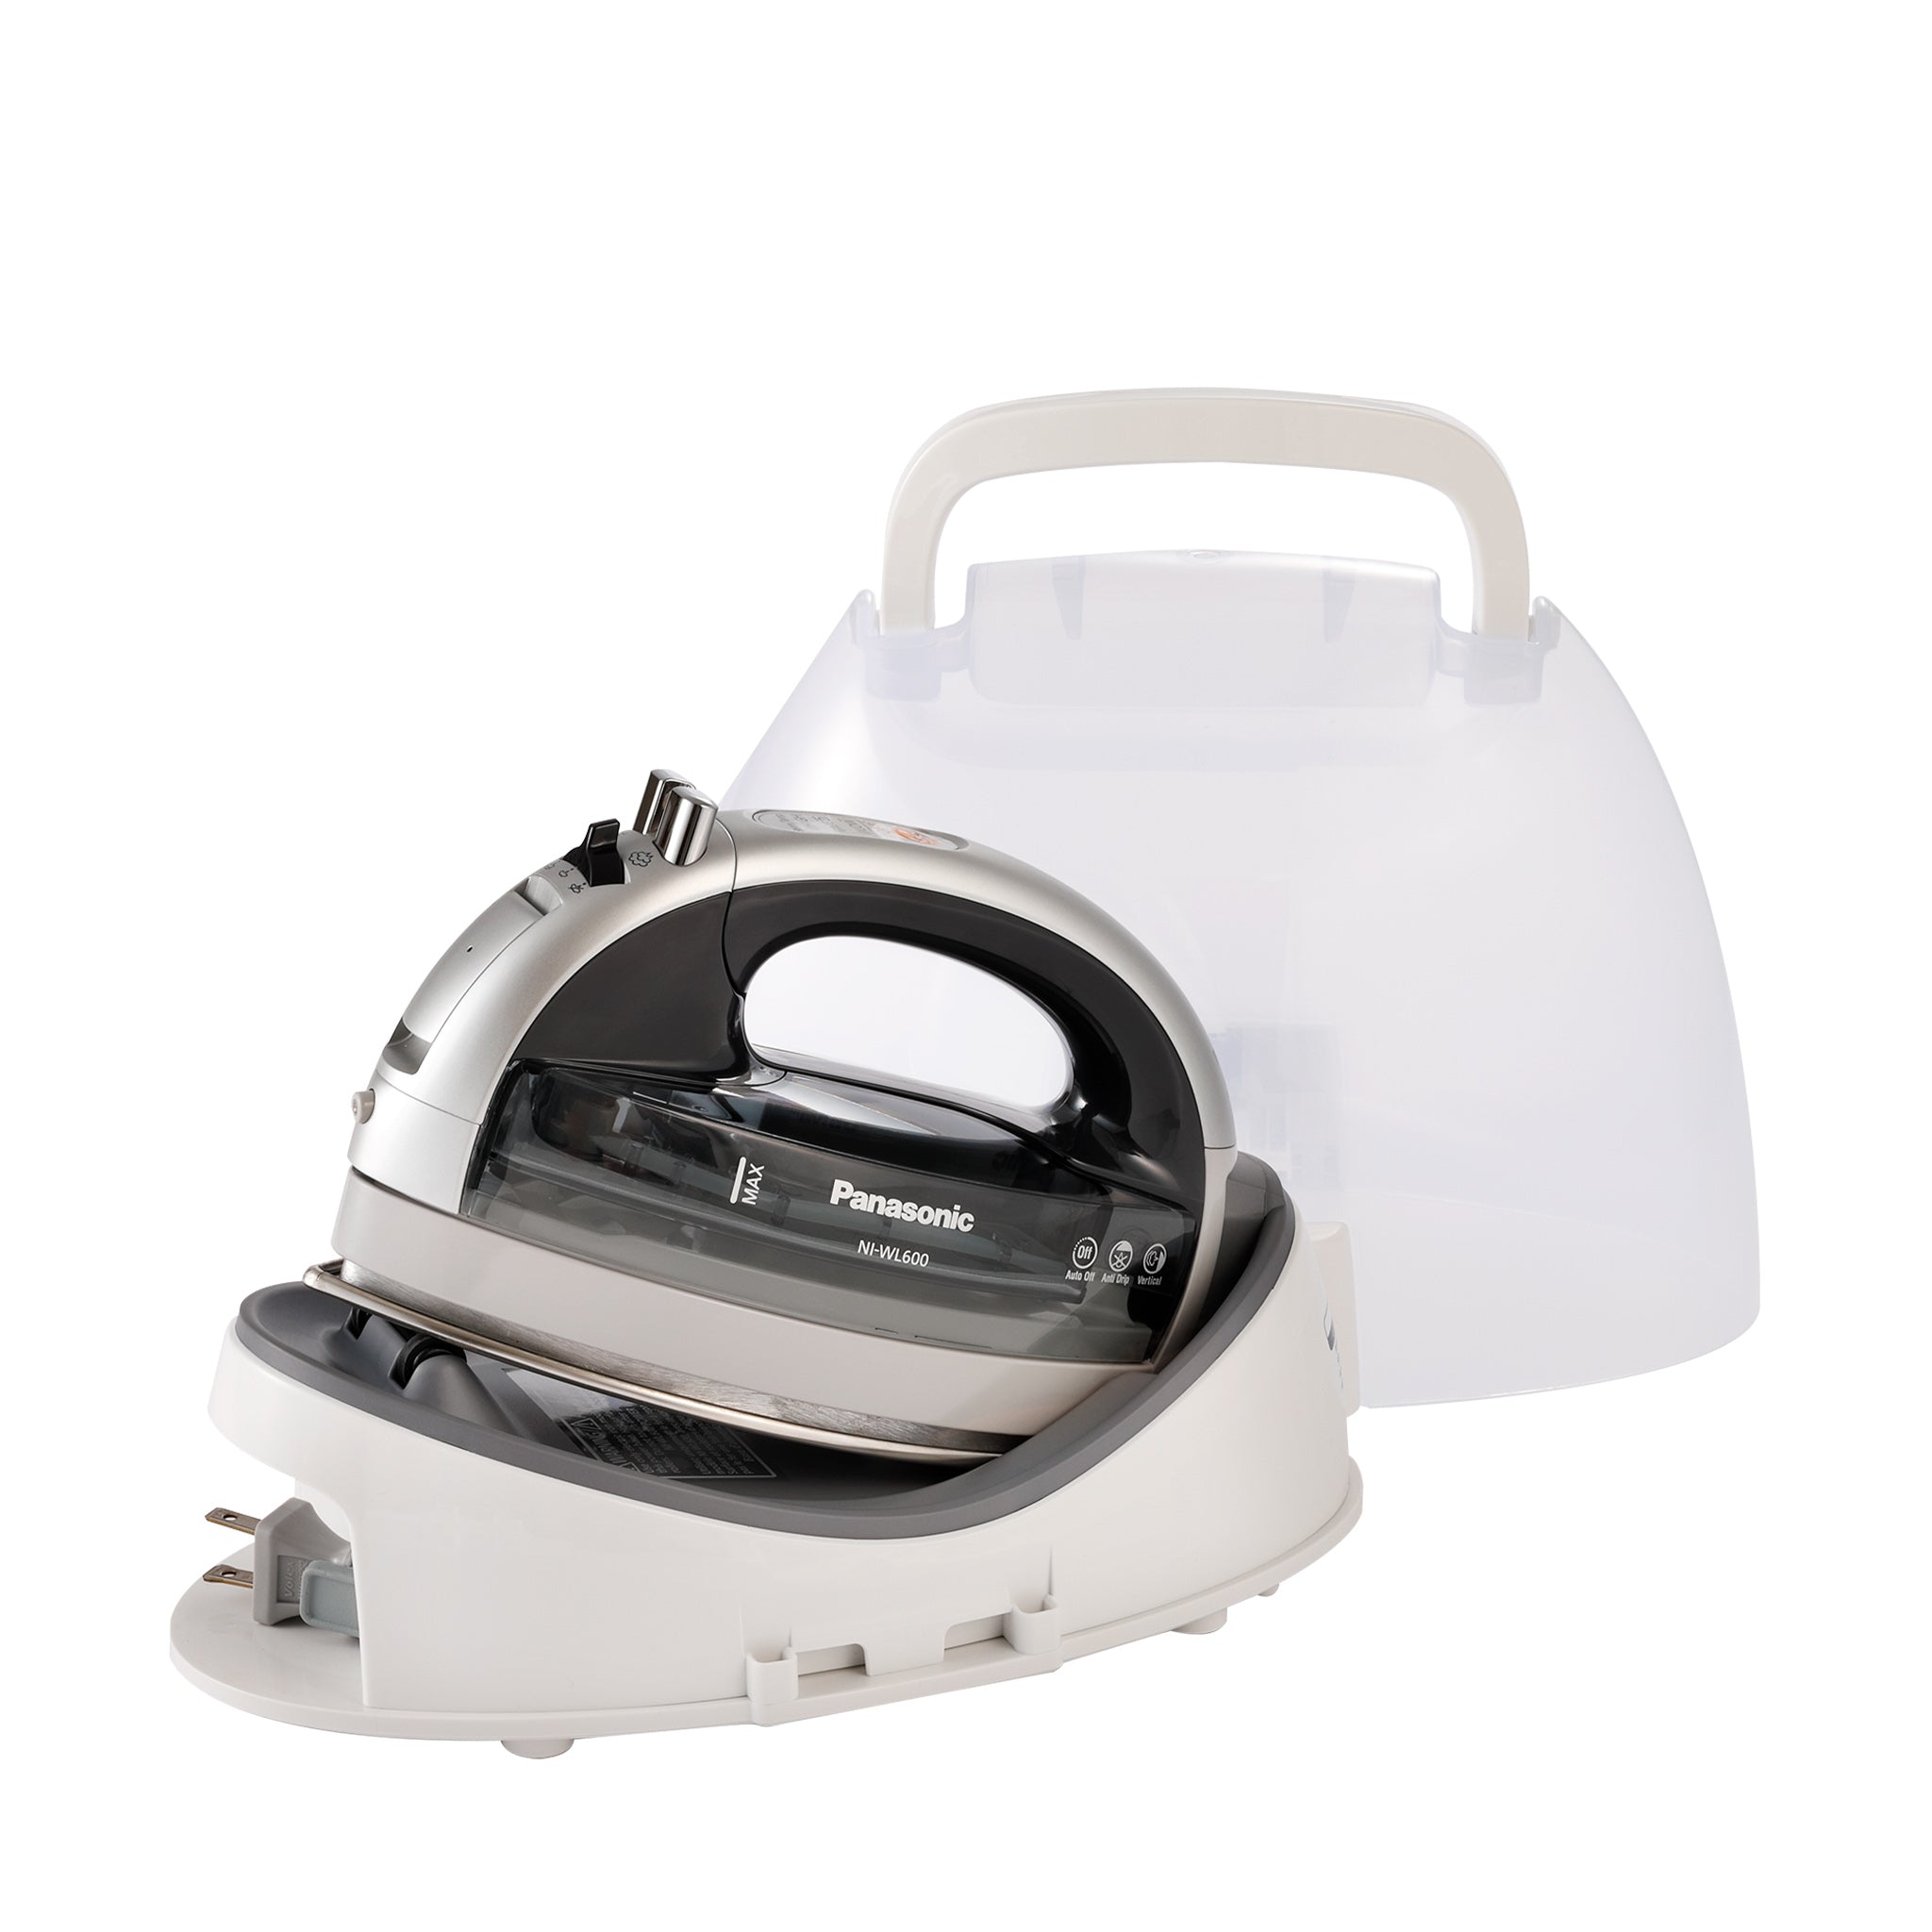 Cordless Steam/Dry Iron 1500W, Stainless Plate